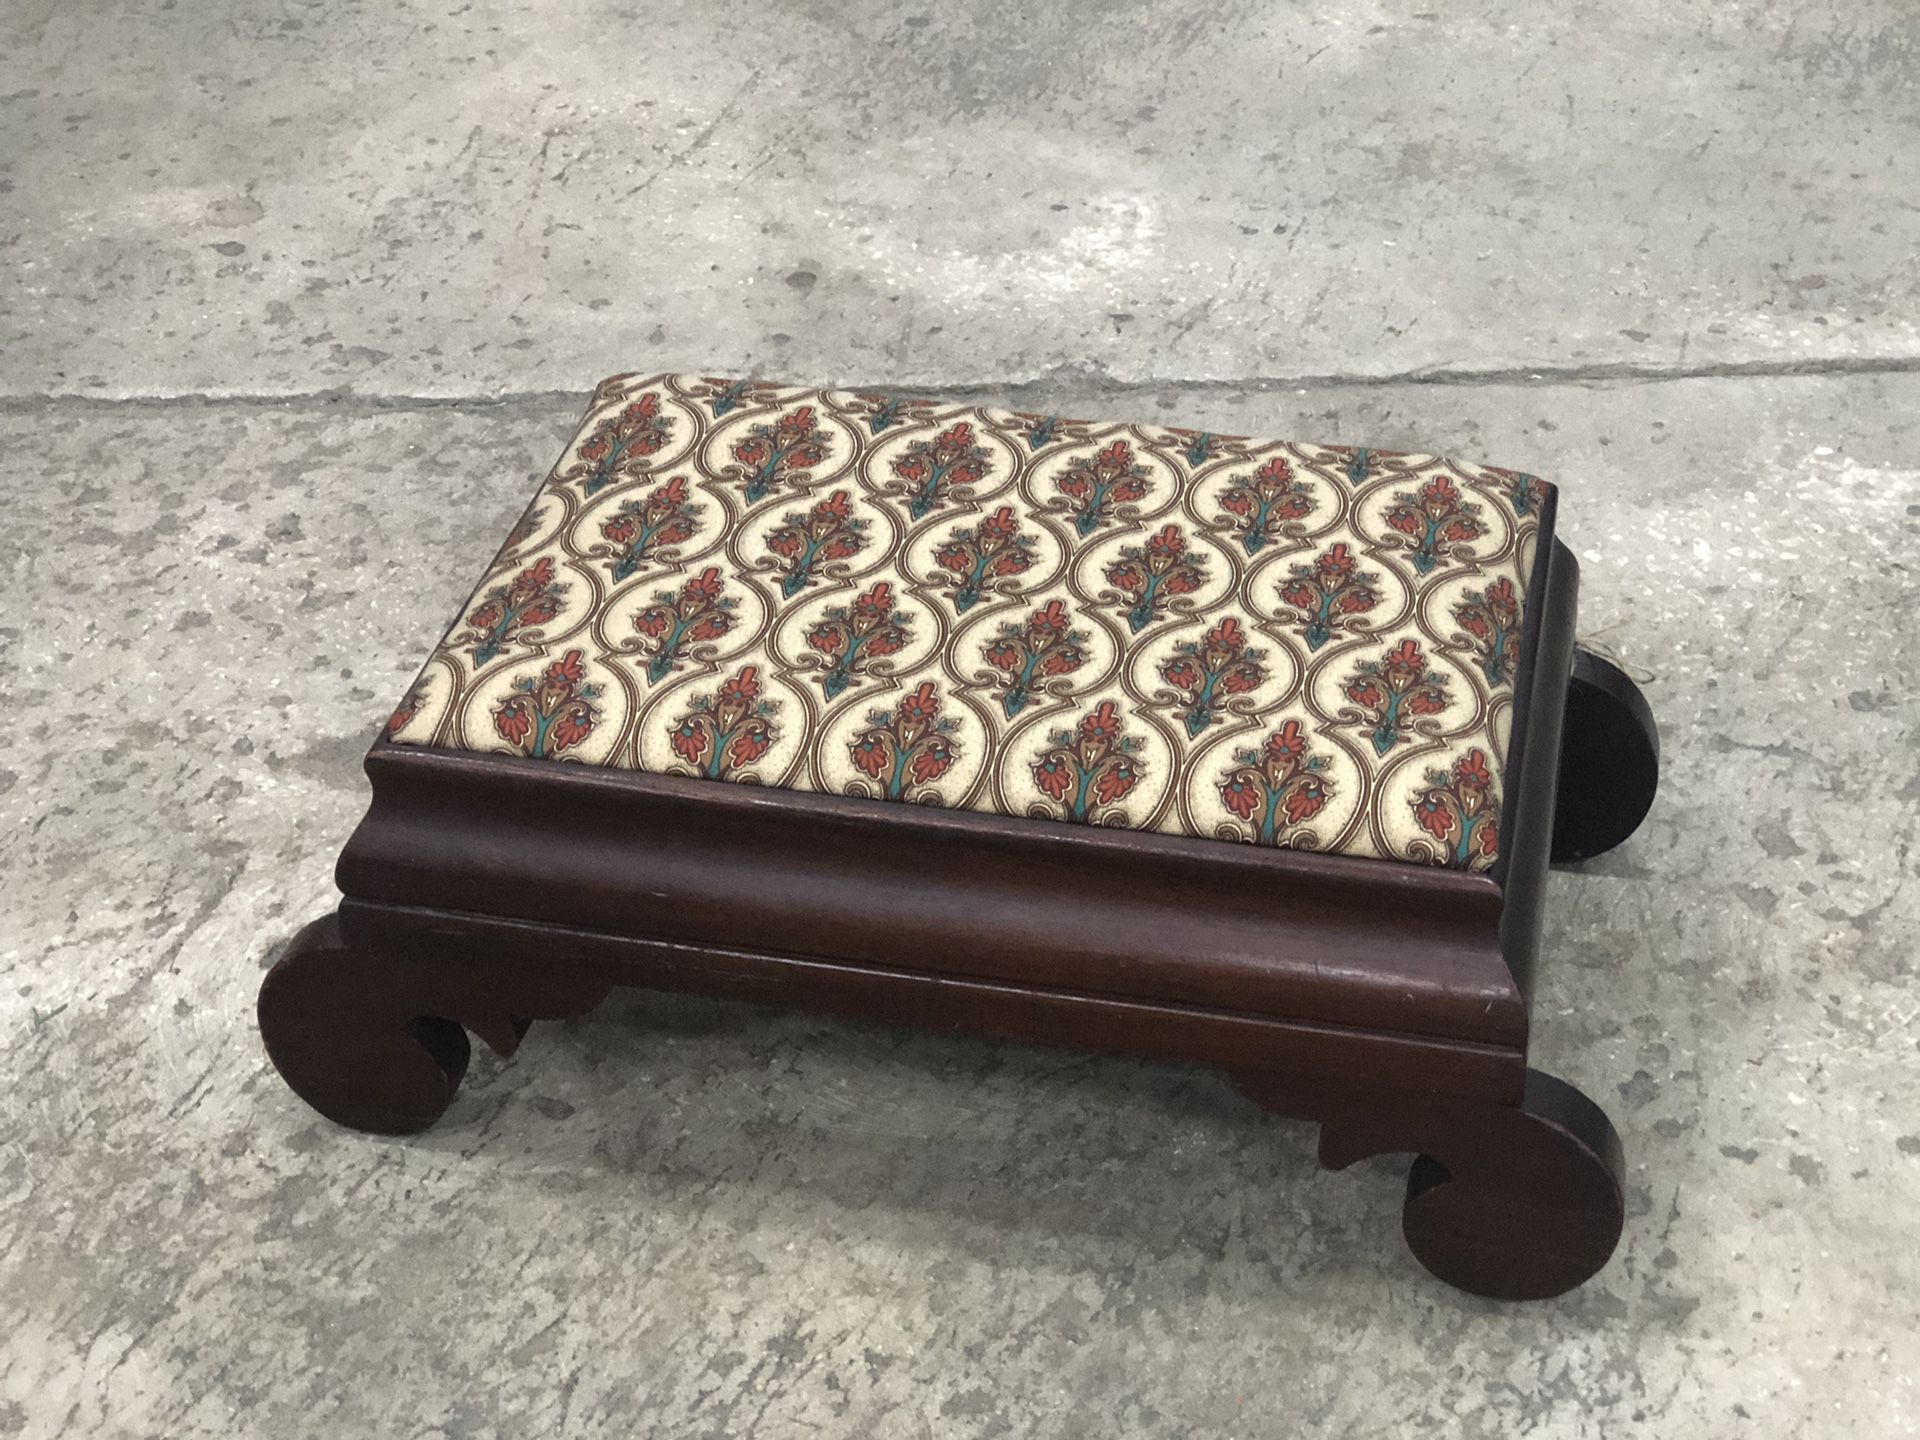 Gorgeous Recovered Antique Mayflower Footstool